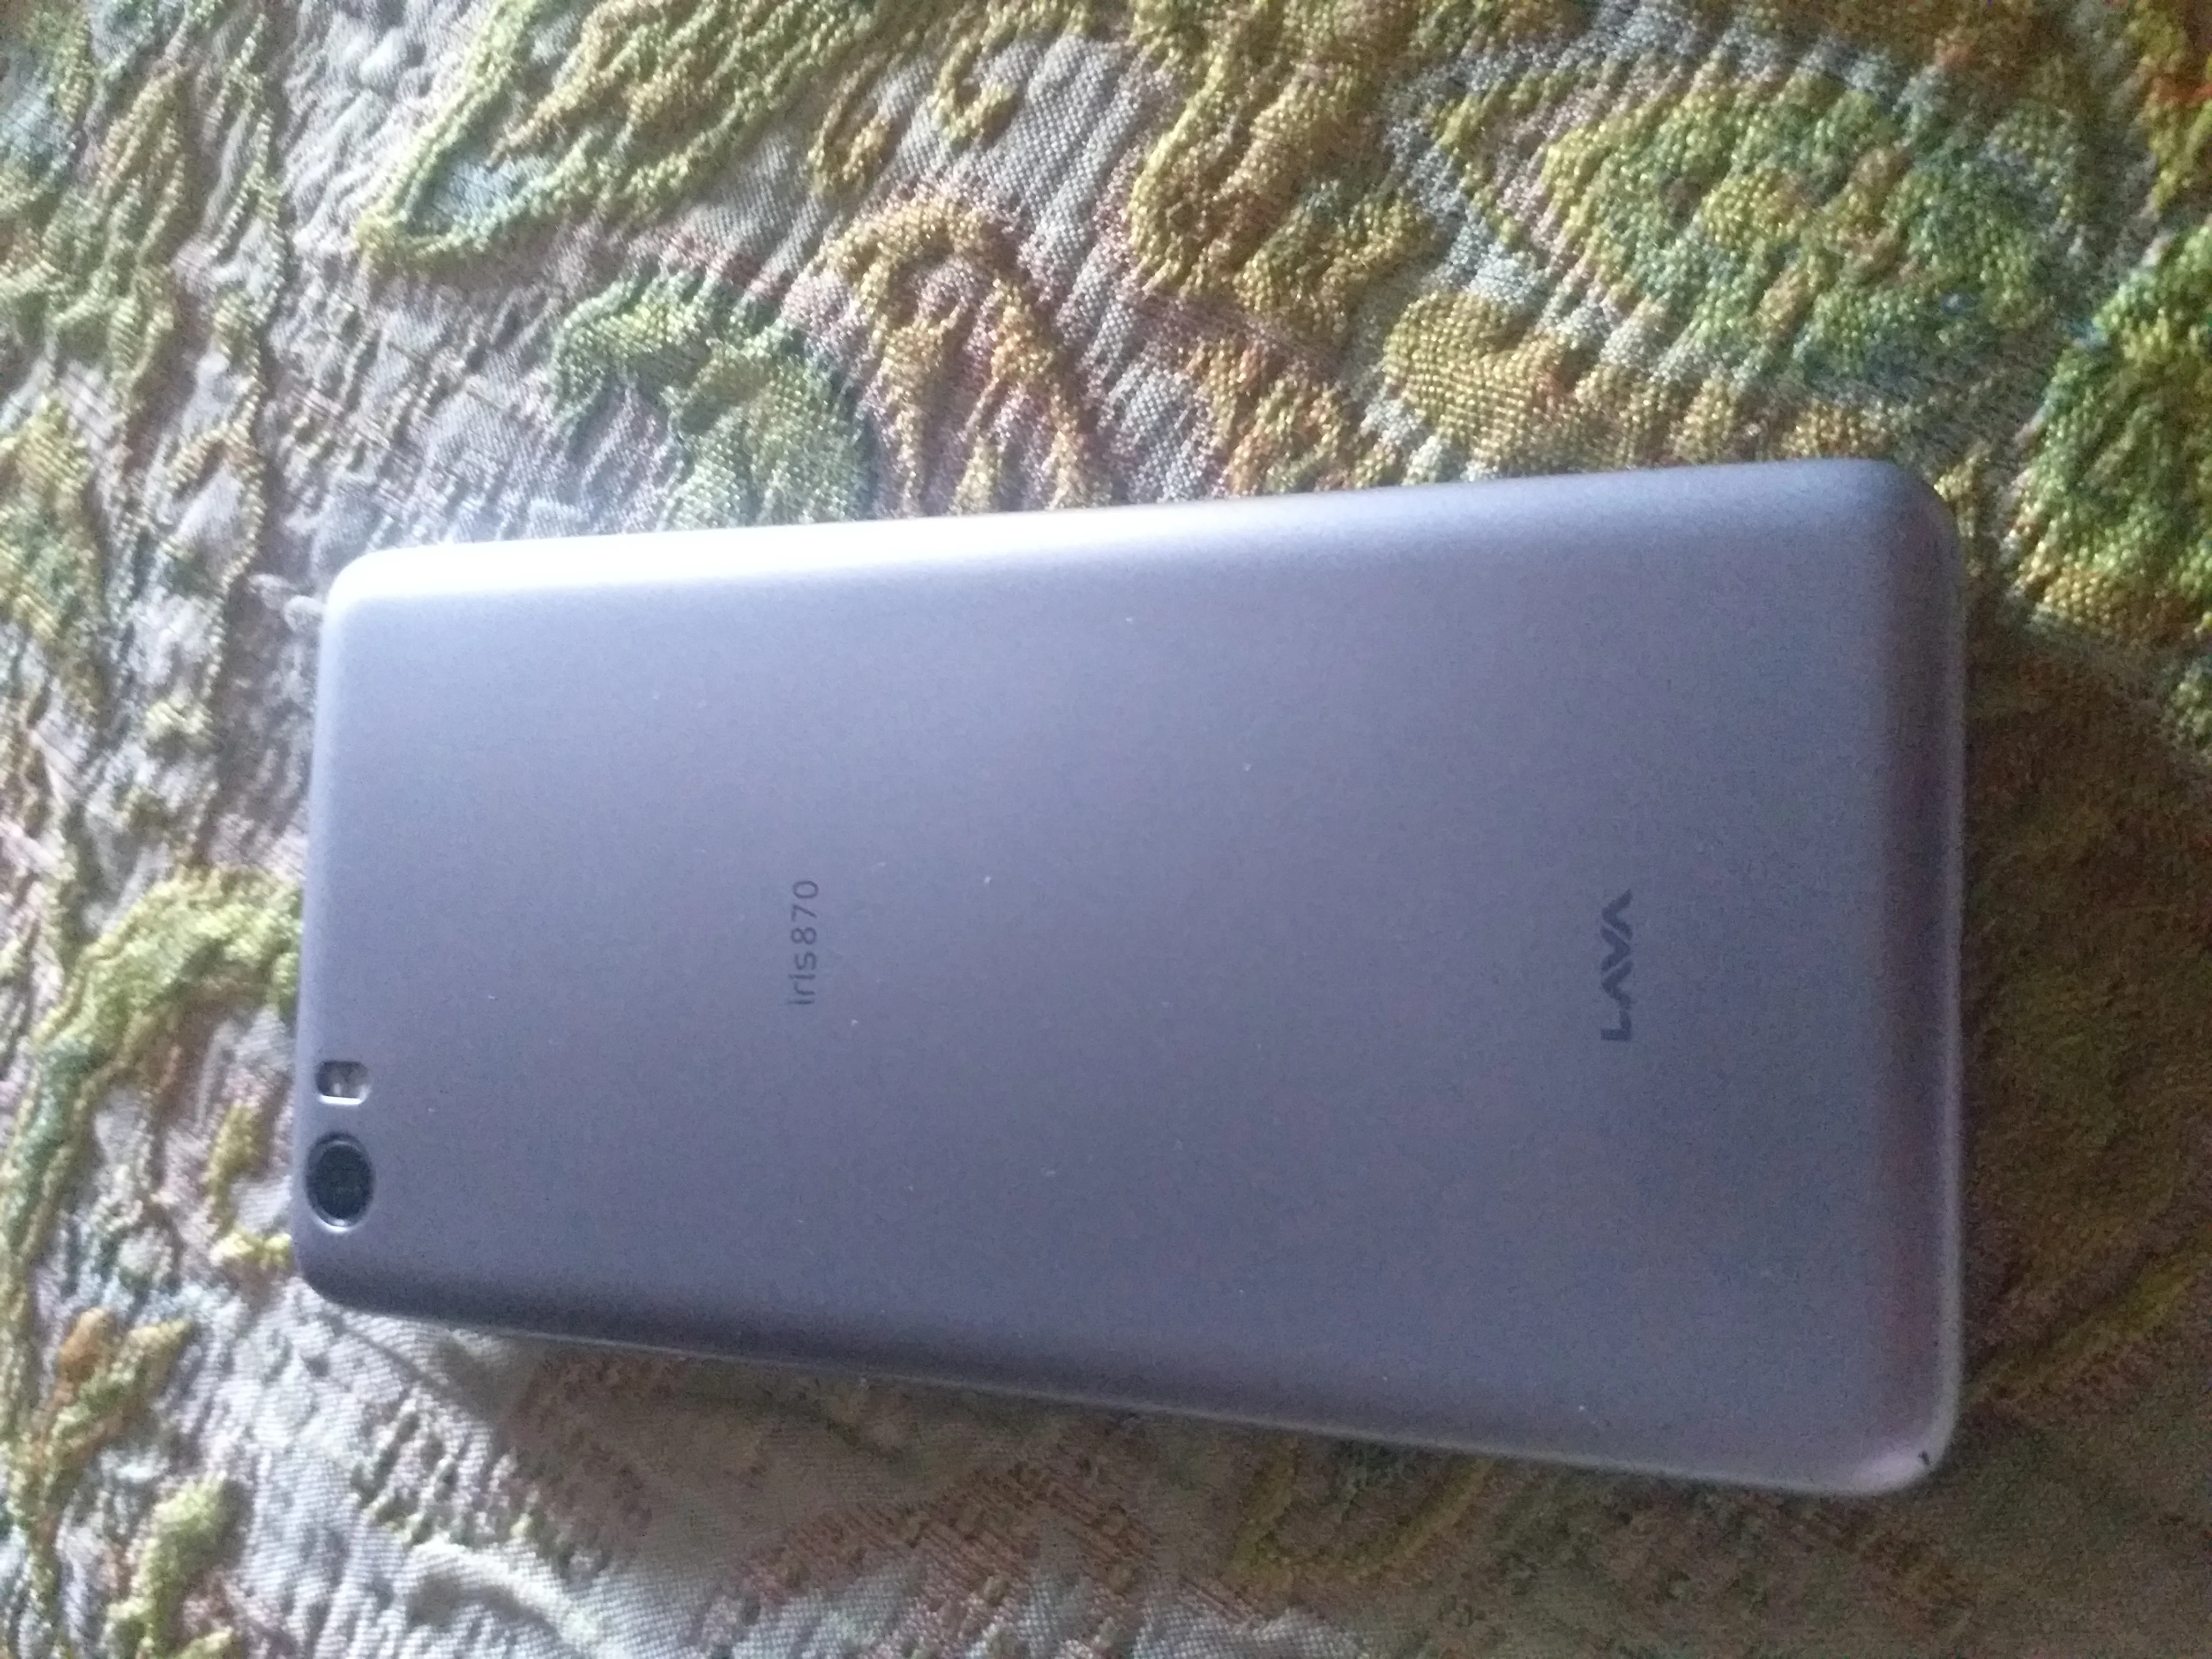 Lava iris 870 for sale and exchang with good phone - photo 2